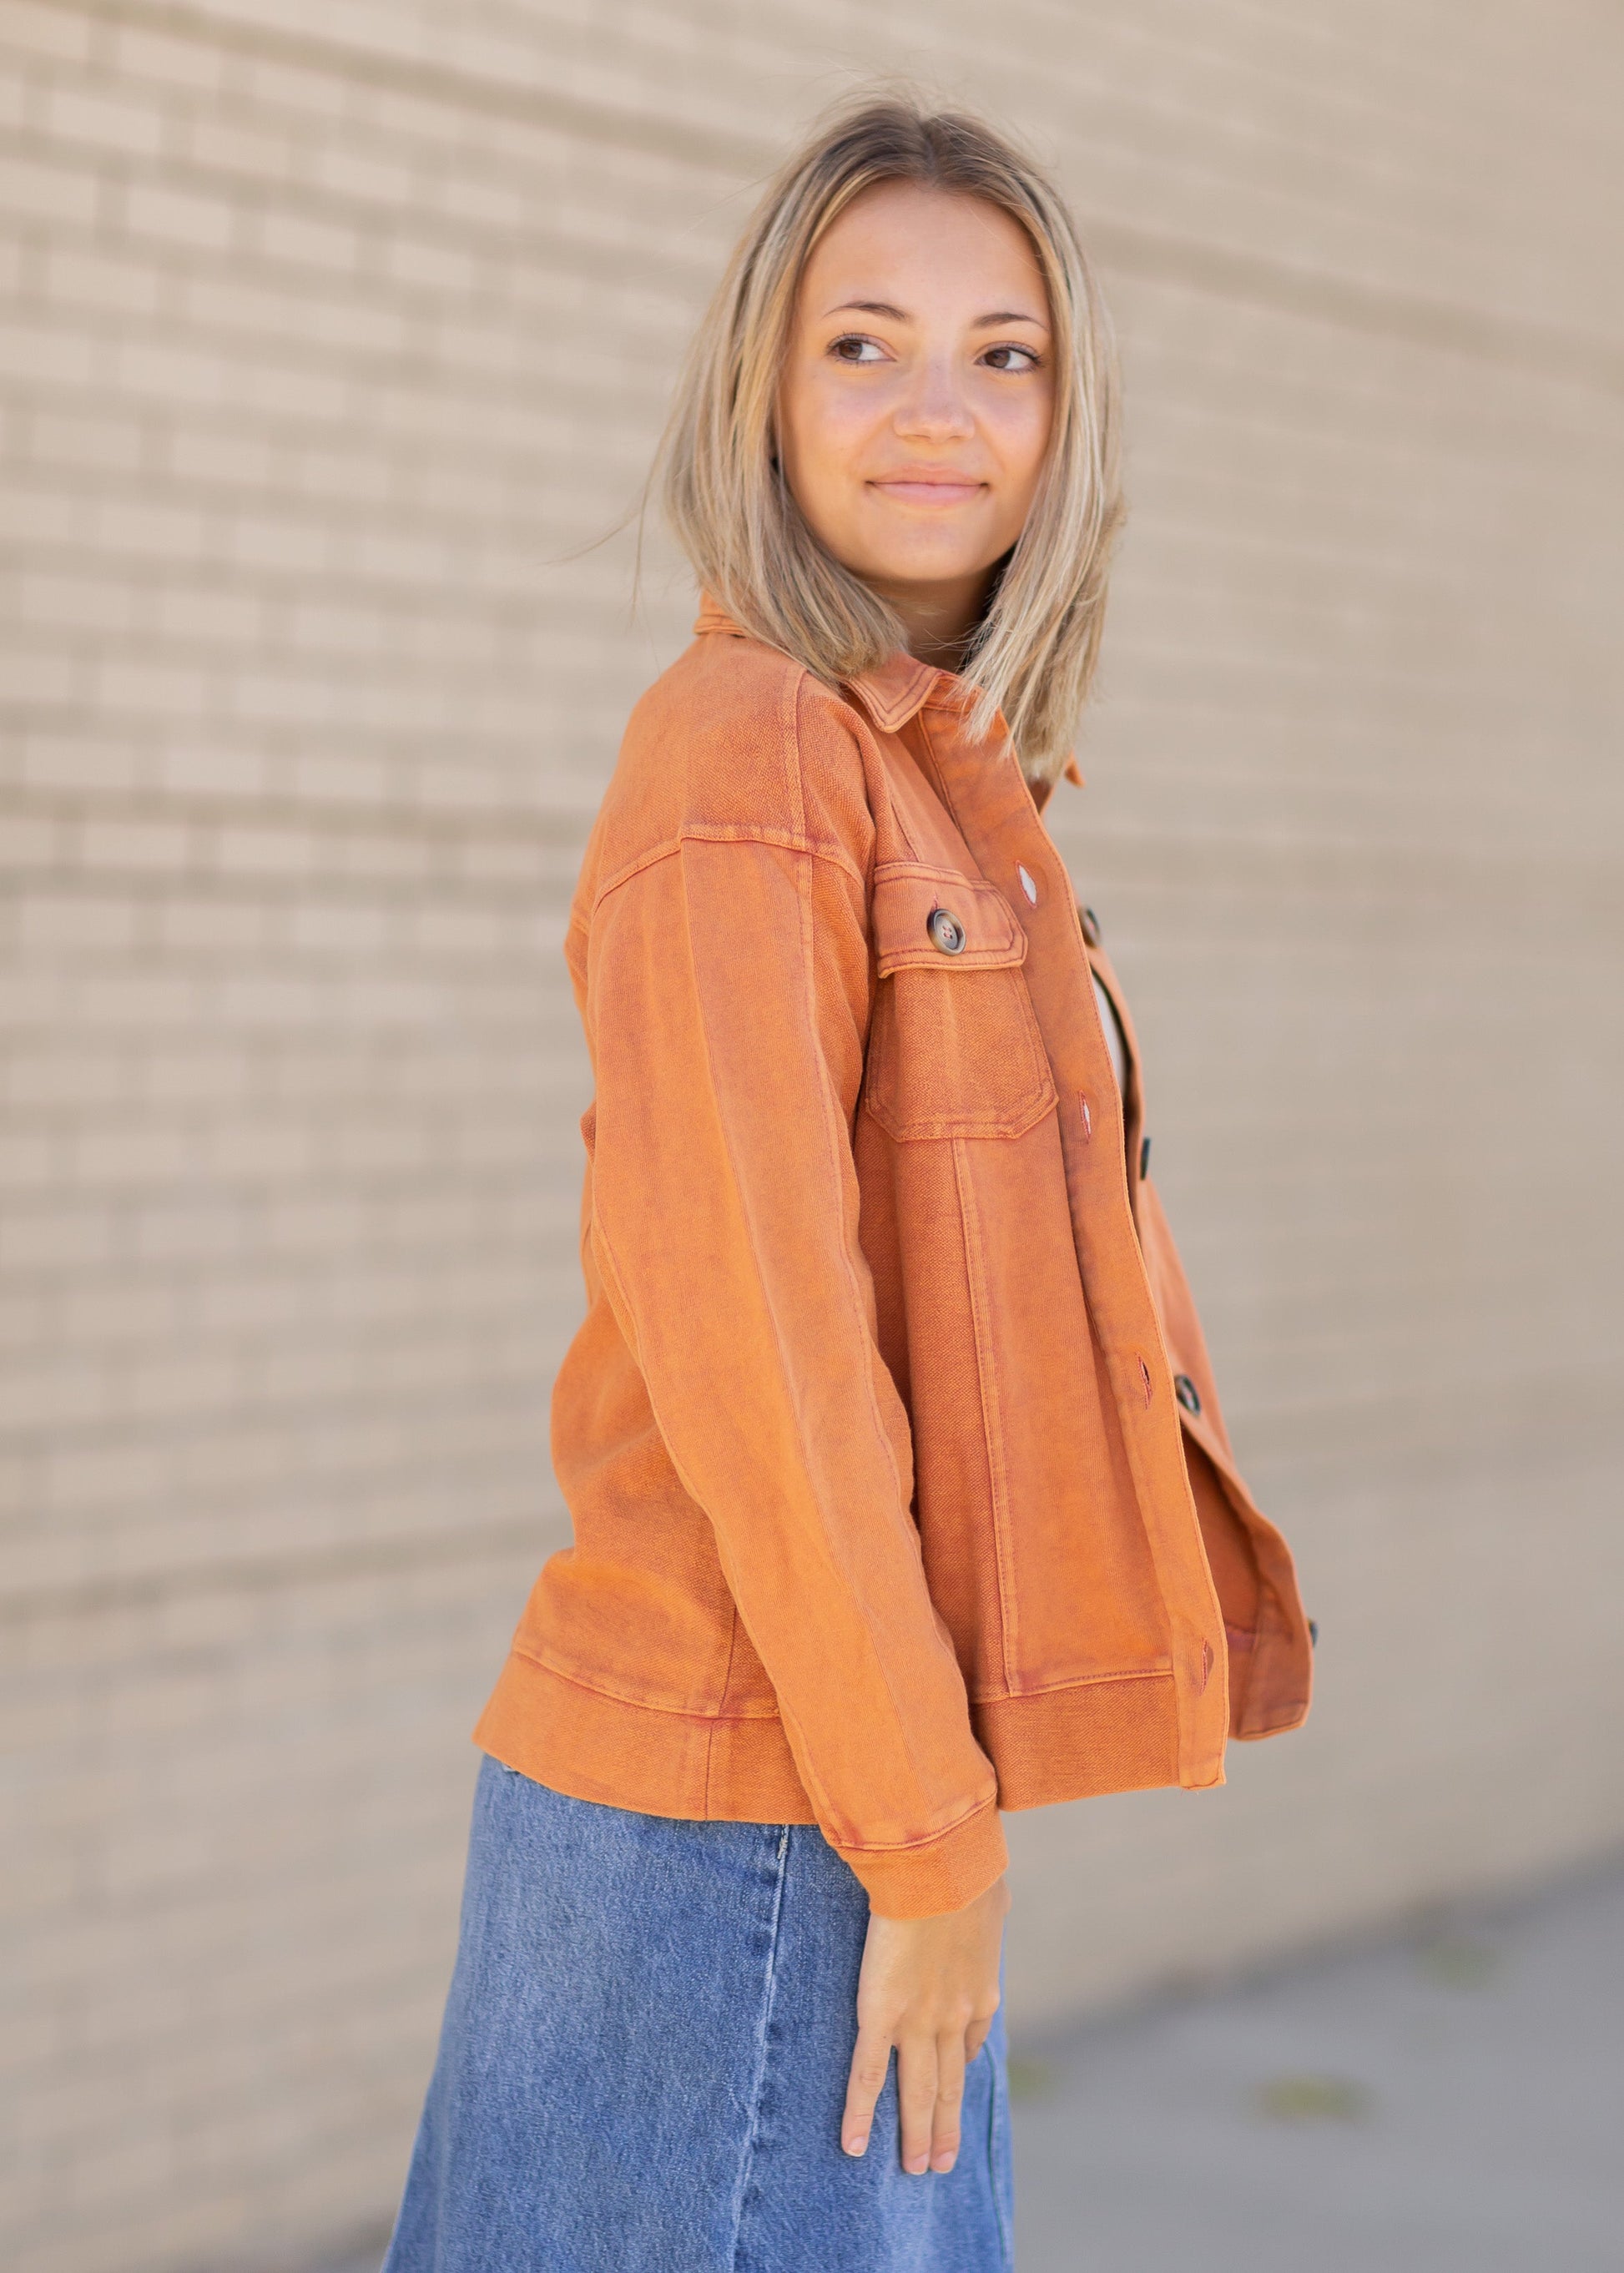 Long Sleeve Button Up Shacket Tops